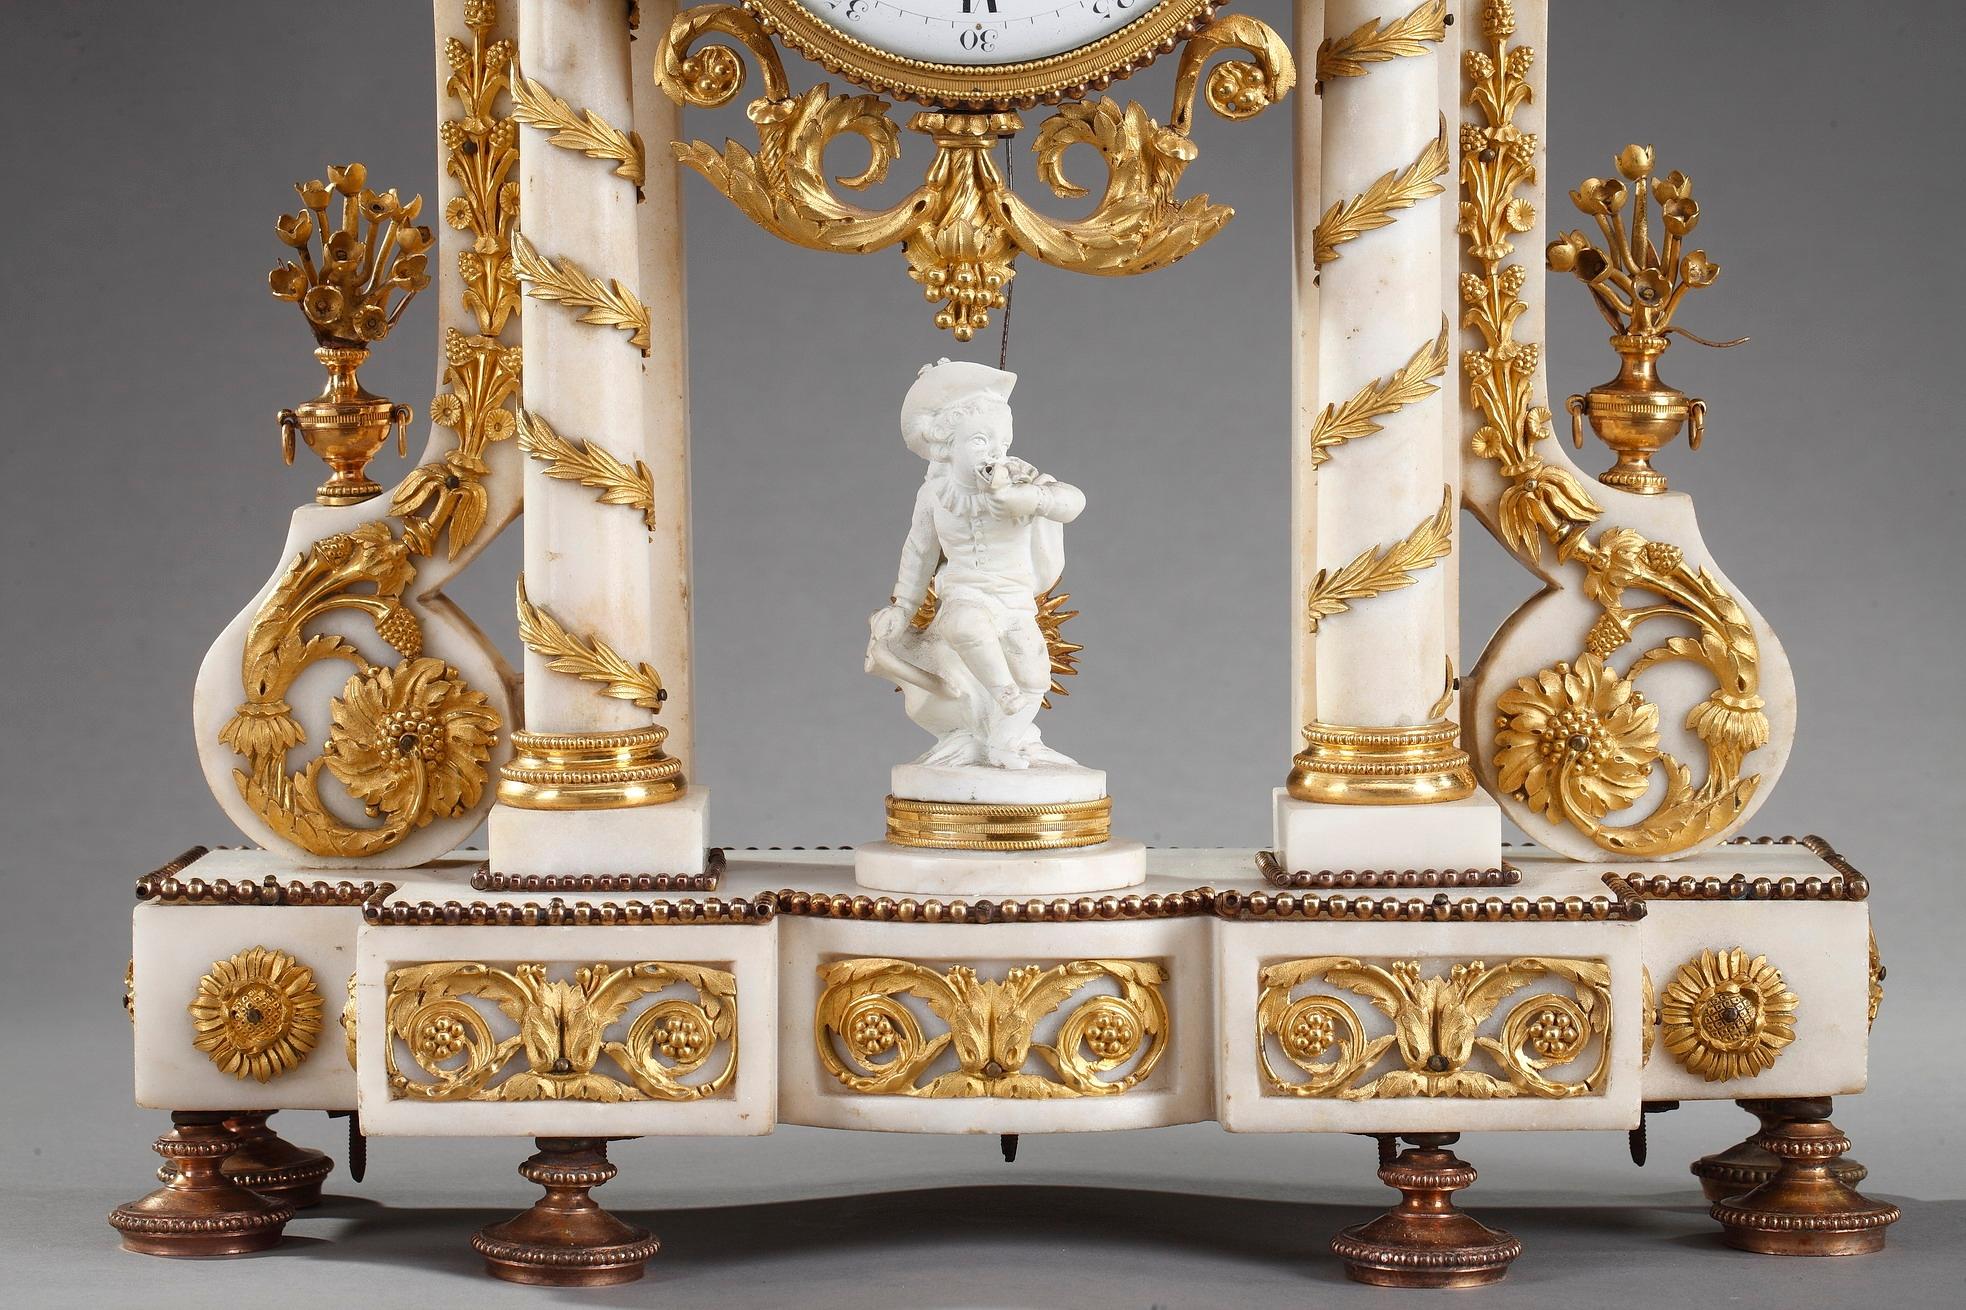 Louis XVI-period portico clock crafted in Carrara marble accentuated by exquisitely detailed ormolu decoration of garlands, flowers, vases, acanthus and laurel leaves. The drum case is supported on a pediment raised on two free standing columns and